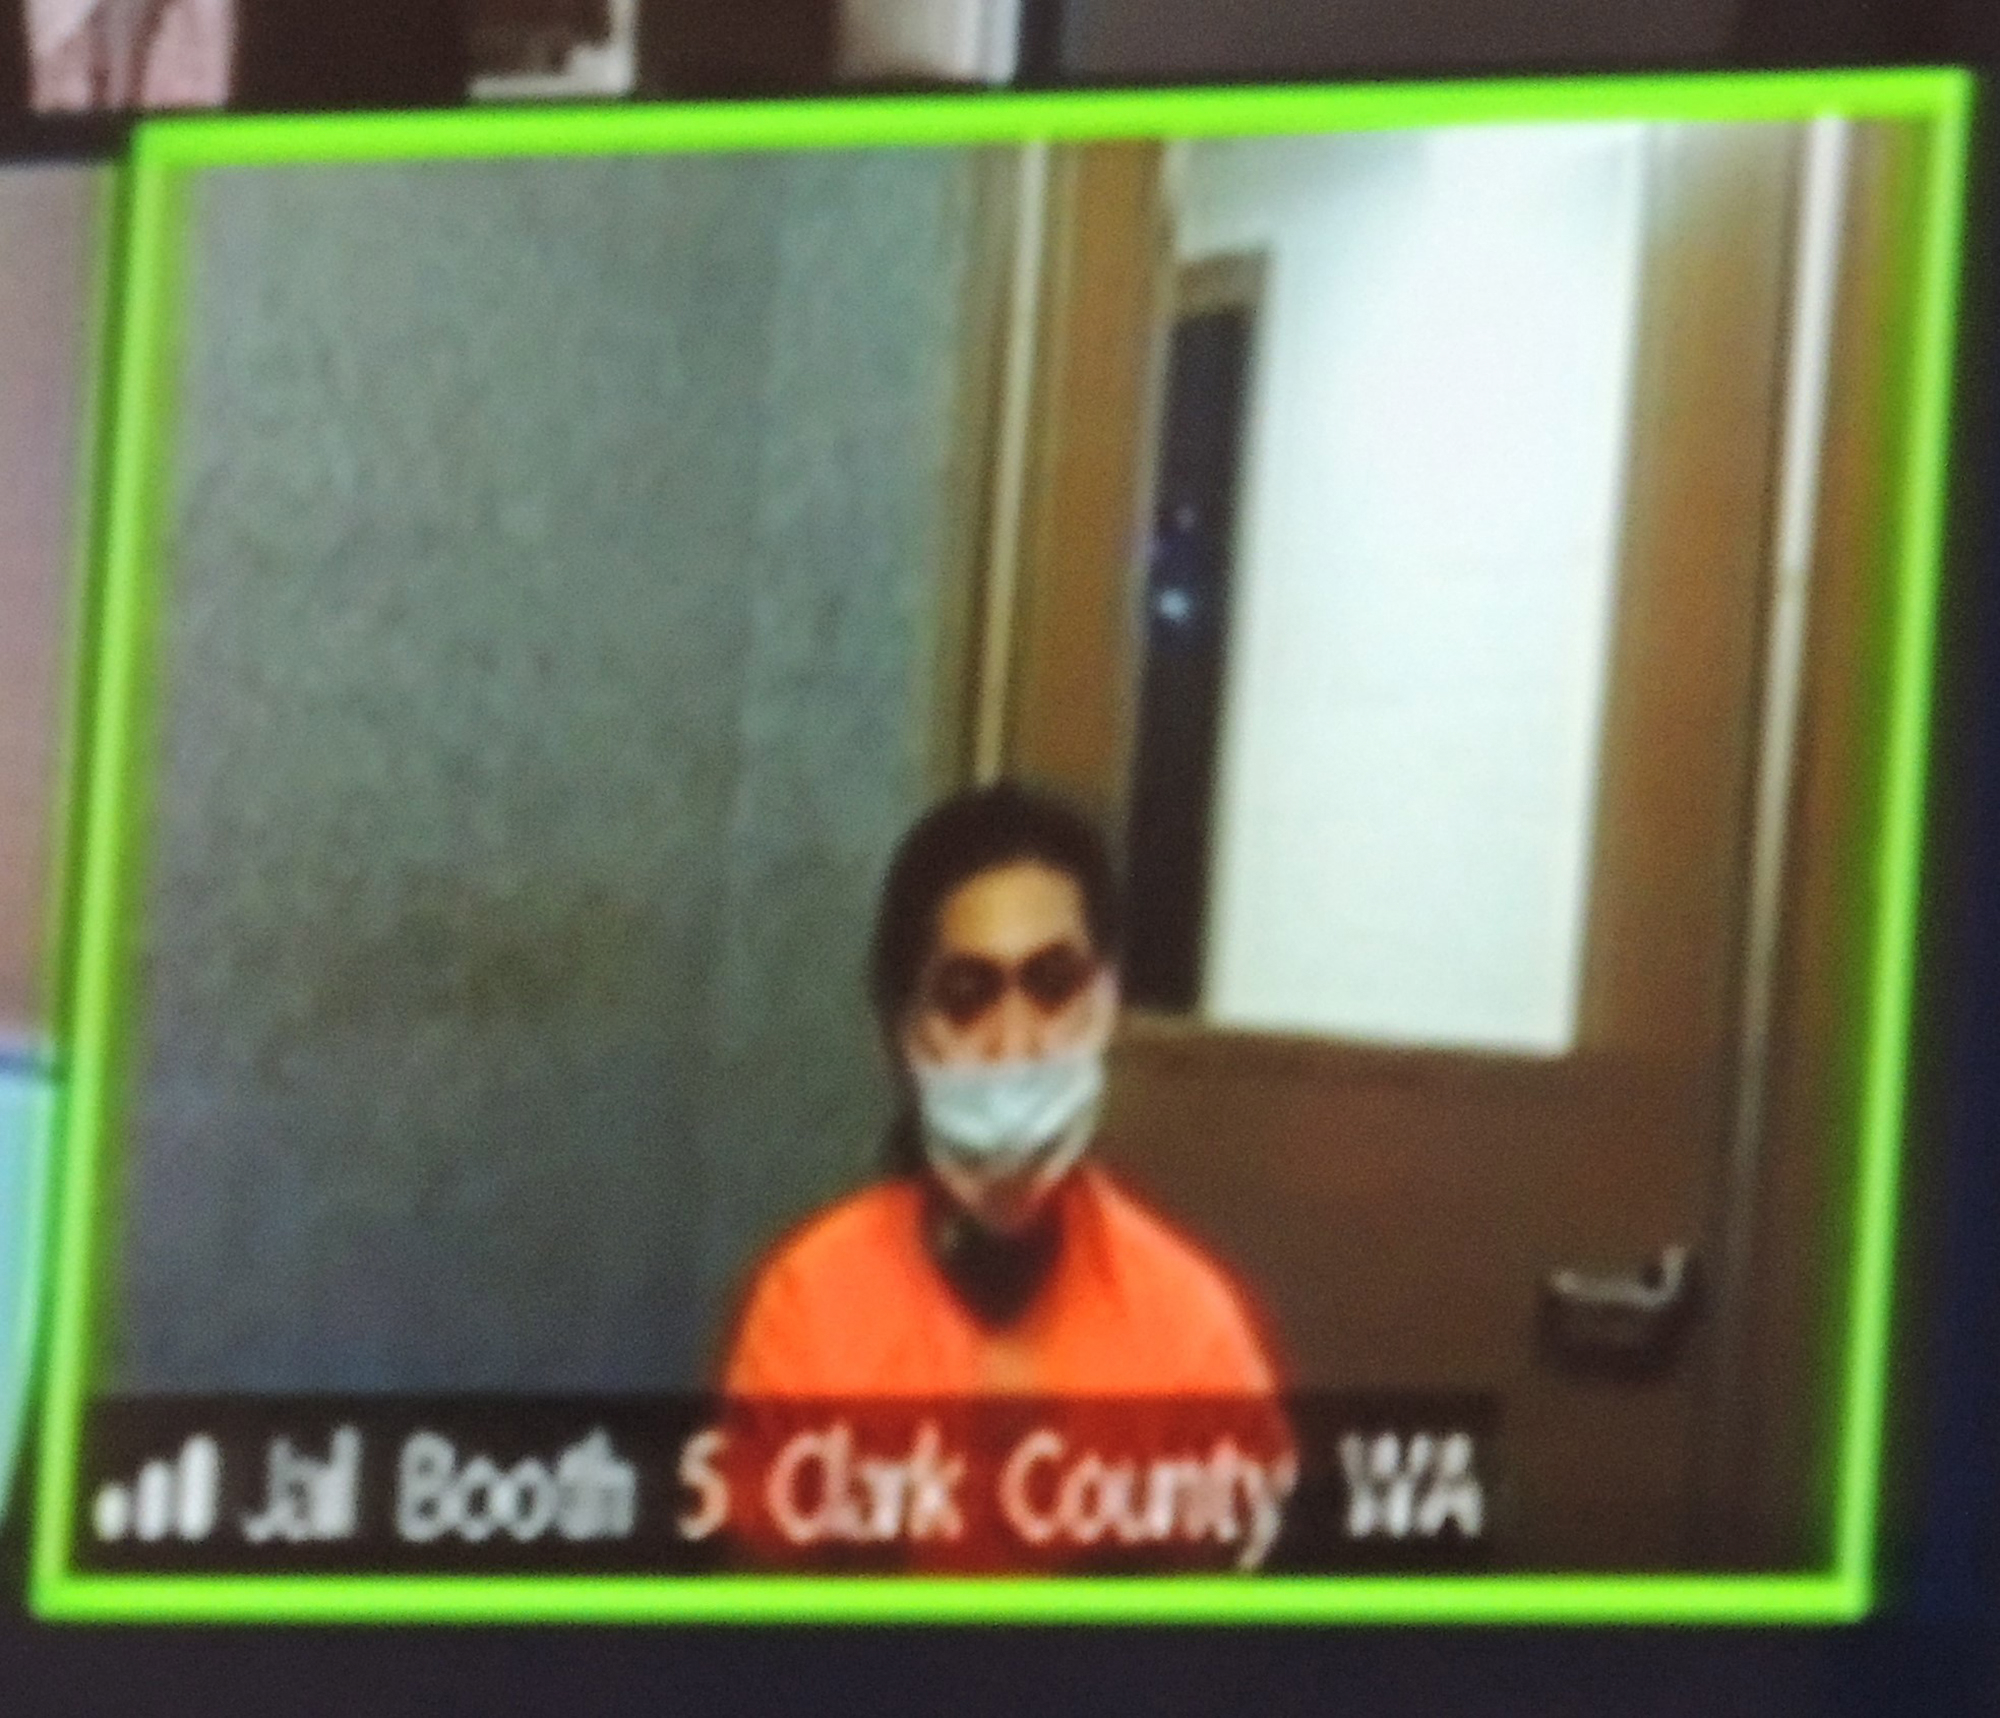 Alexandro Bolon Manrero, 19, appears Friday, Dec. 3, 2021, in Clark County Superior Court on suspicion of second-degree murder. Bolton Manrero was arrested Thursday in connection with the Nov. 19 shooting death of Josue Isac Lopez Padilla.